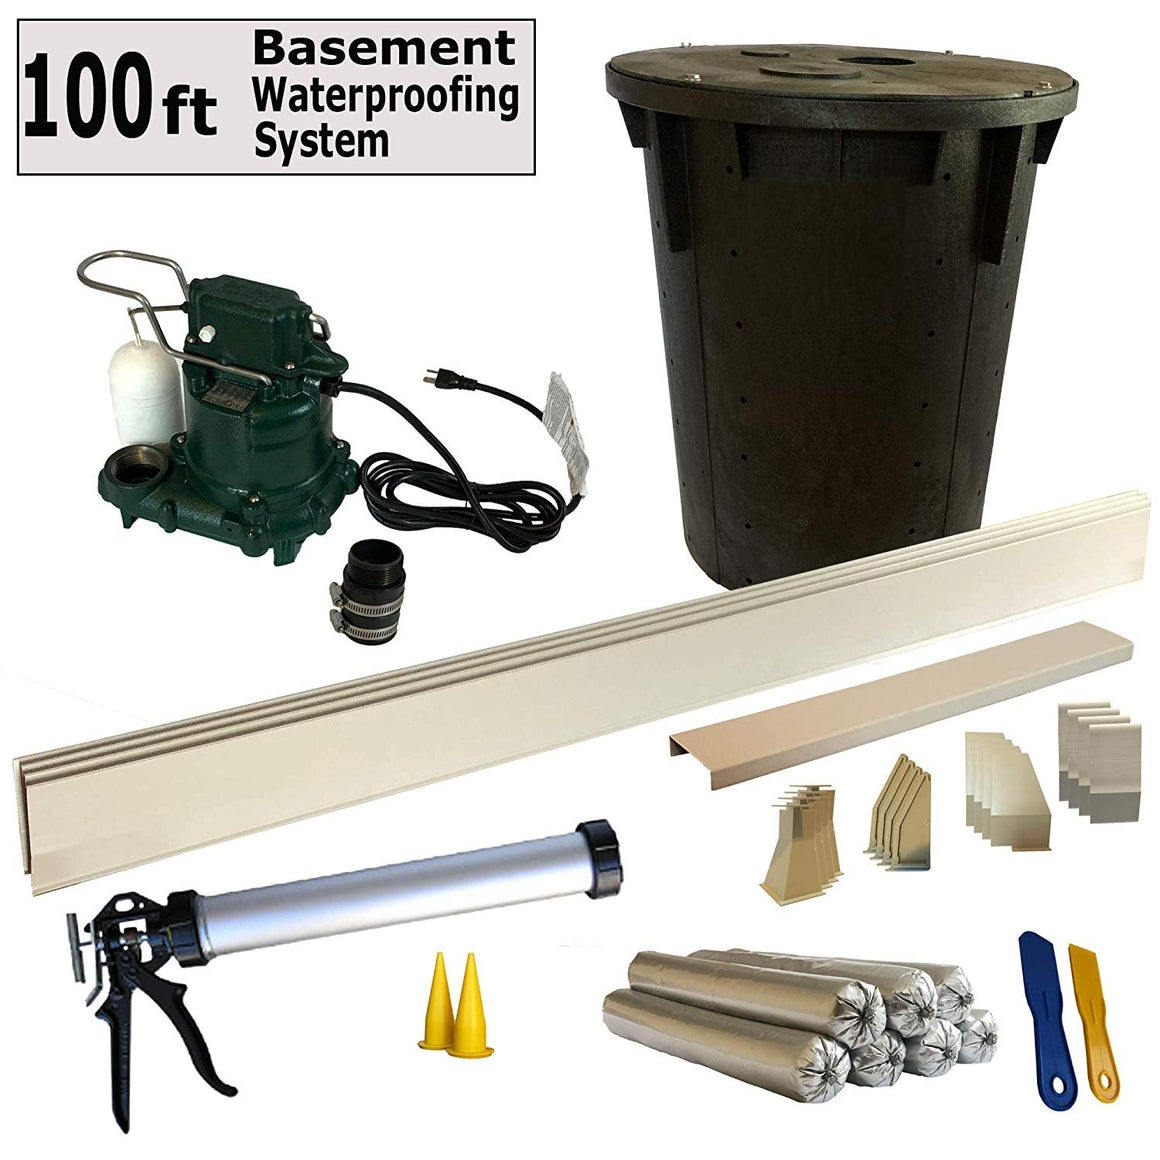 100 Ft - Complete Basement Waterproofing System. Includes, baseboard channel gutter panels, sump pump & basin, floor adhesive, caulk gun and all accessories. DIY System